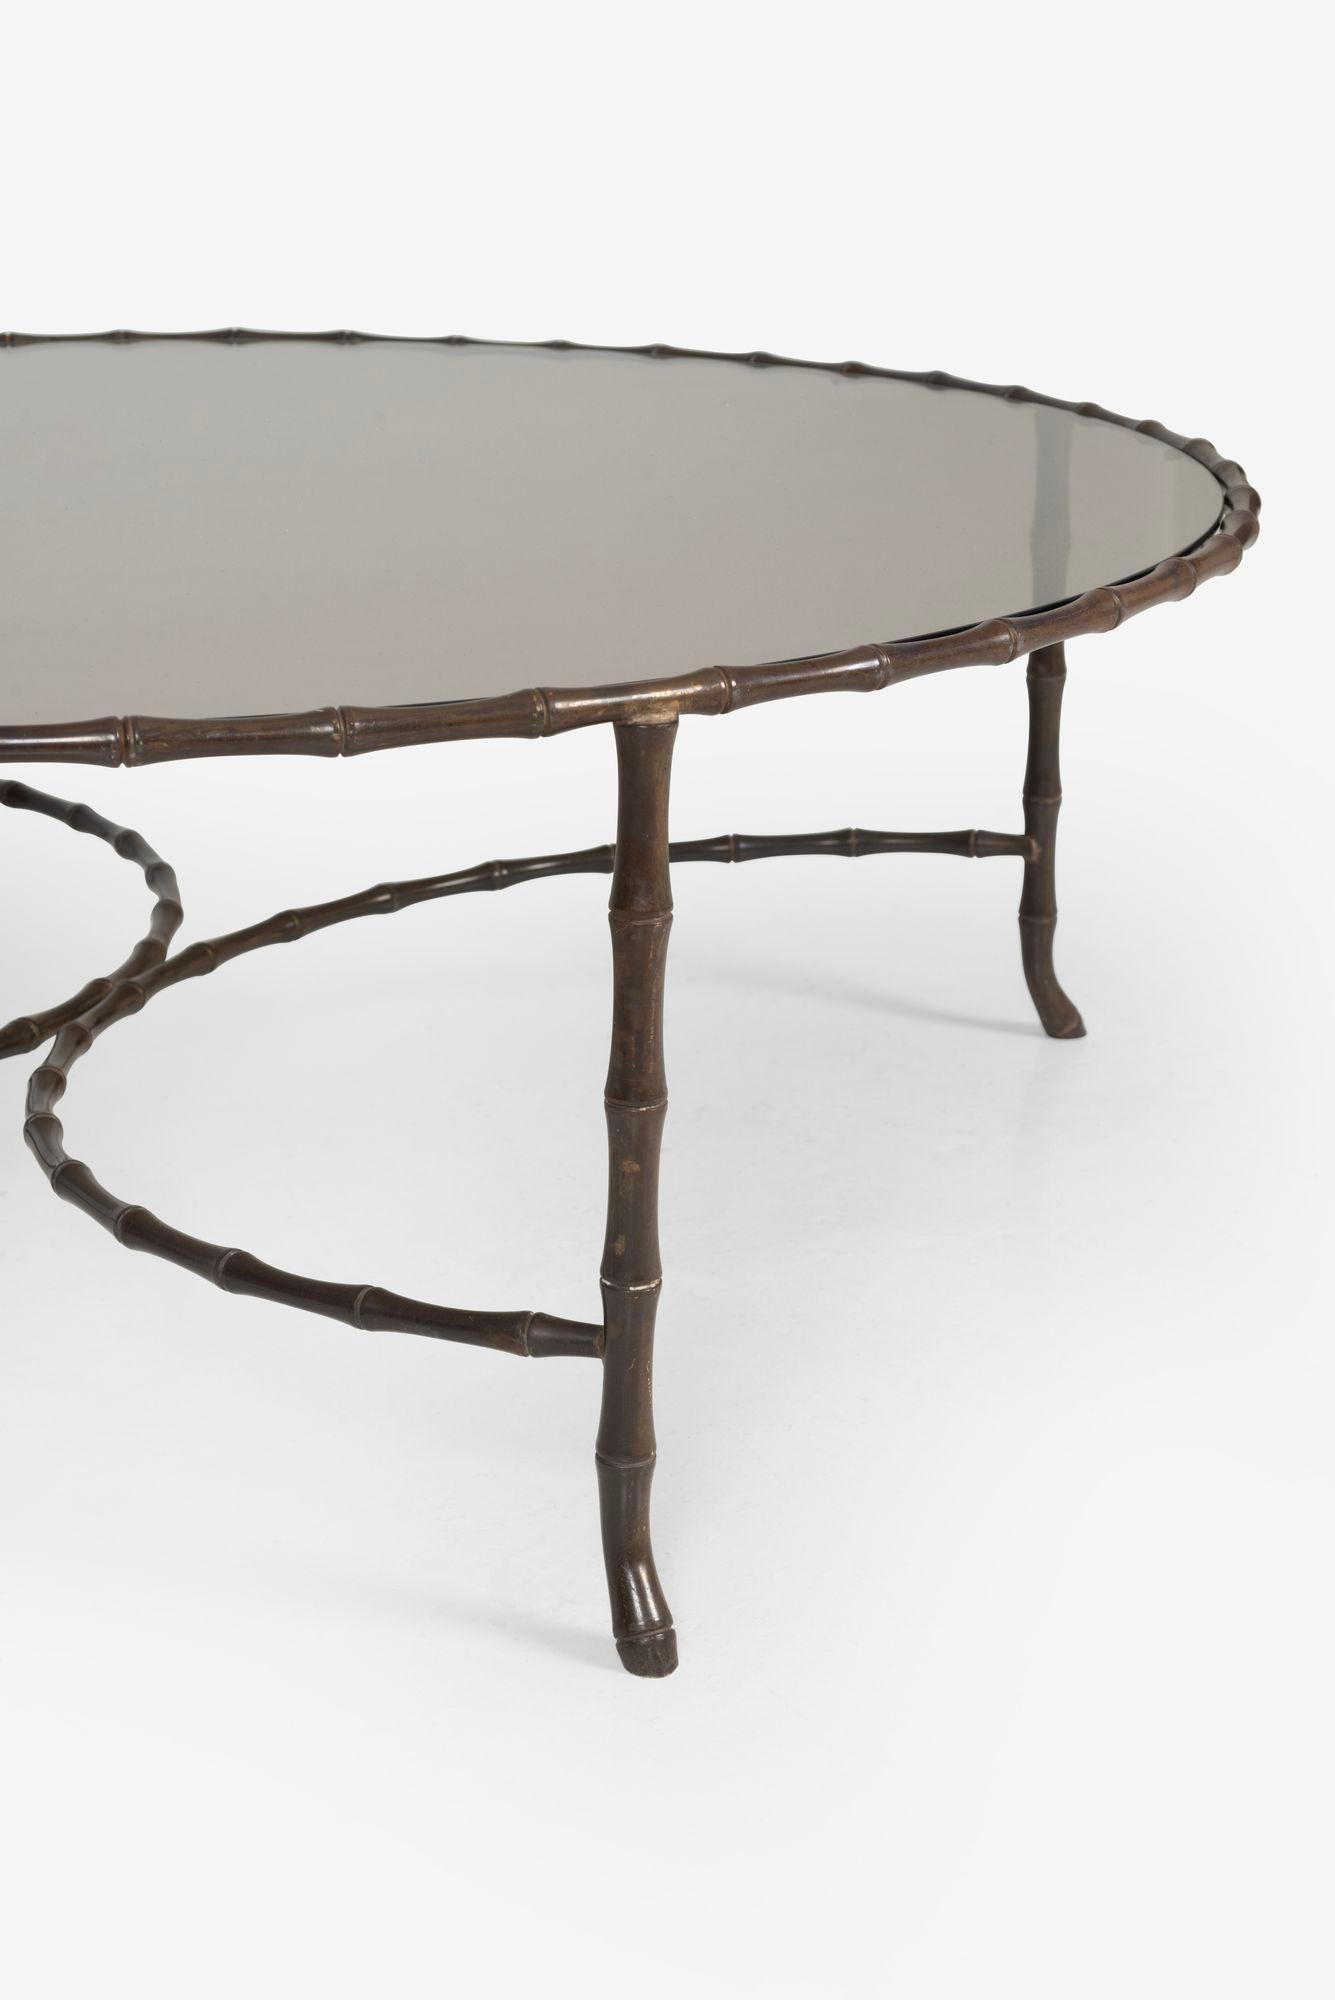 Mid-20th Century Maison Jansen Style Faux Metal Bamboo Round Cocktail Table For Sale